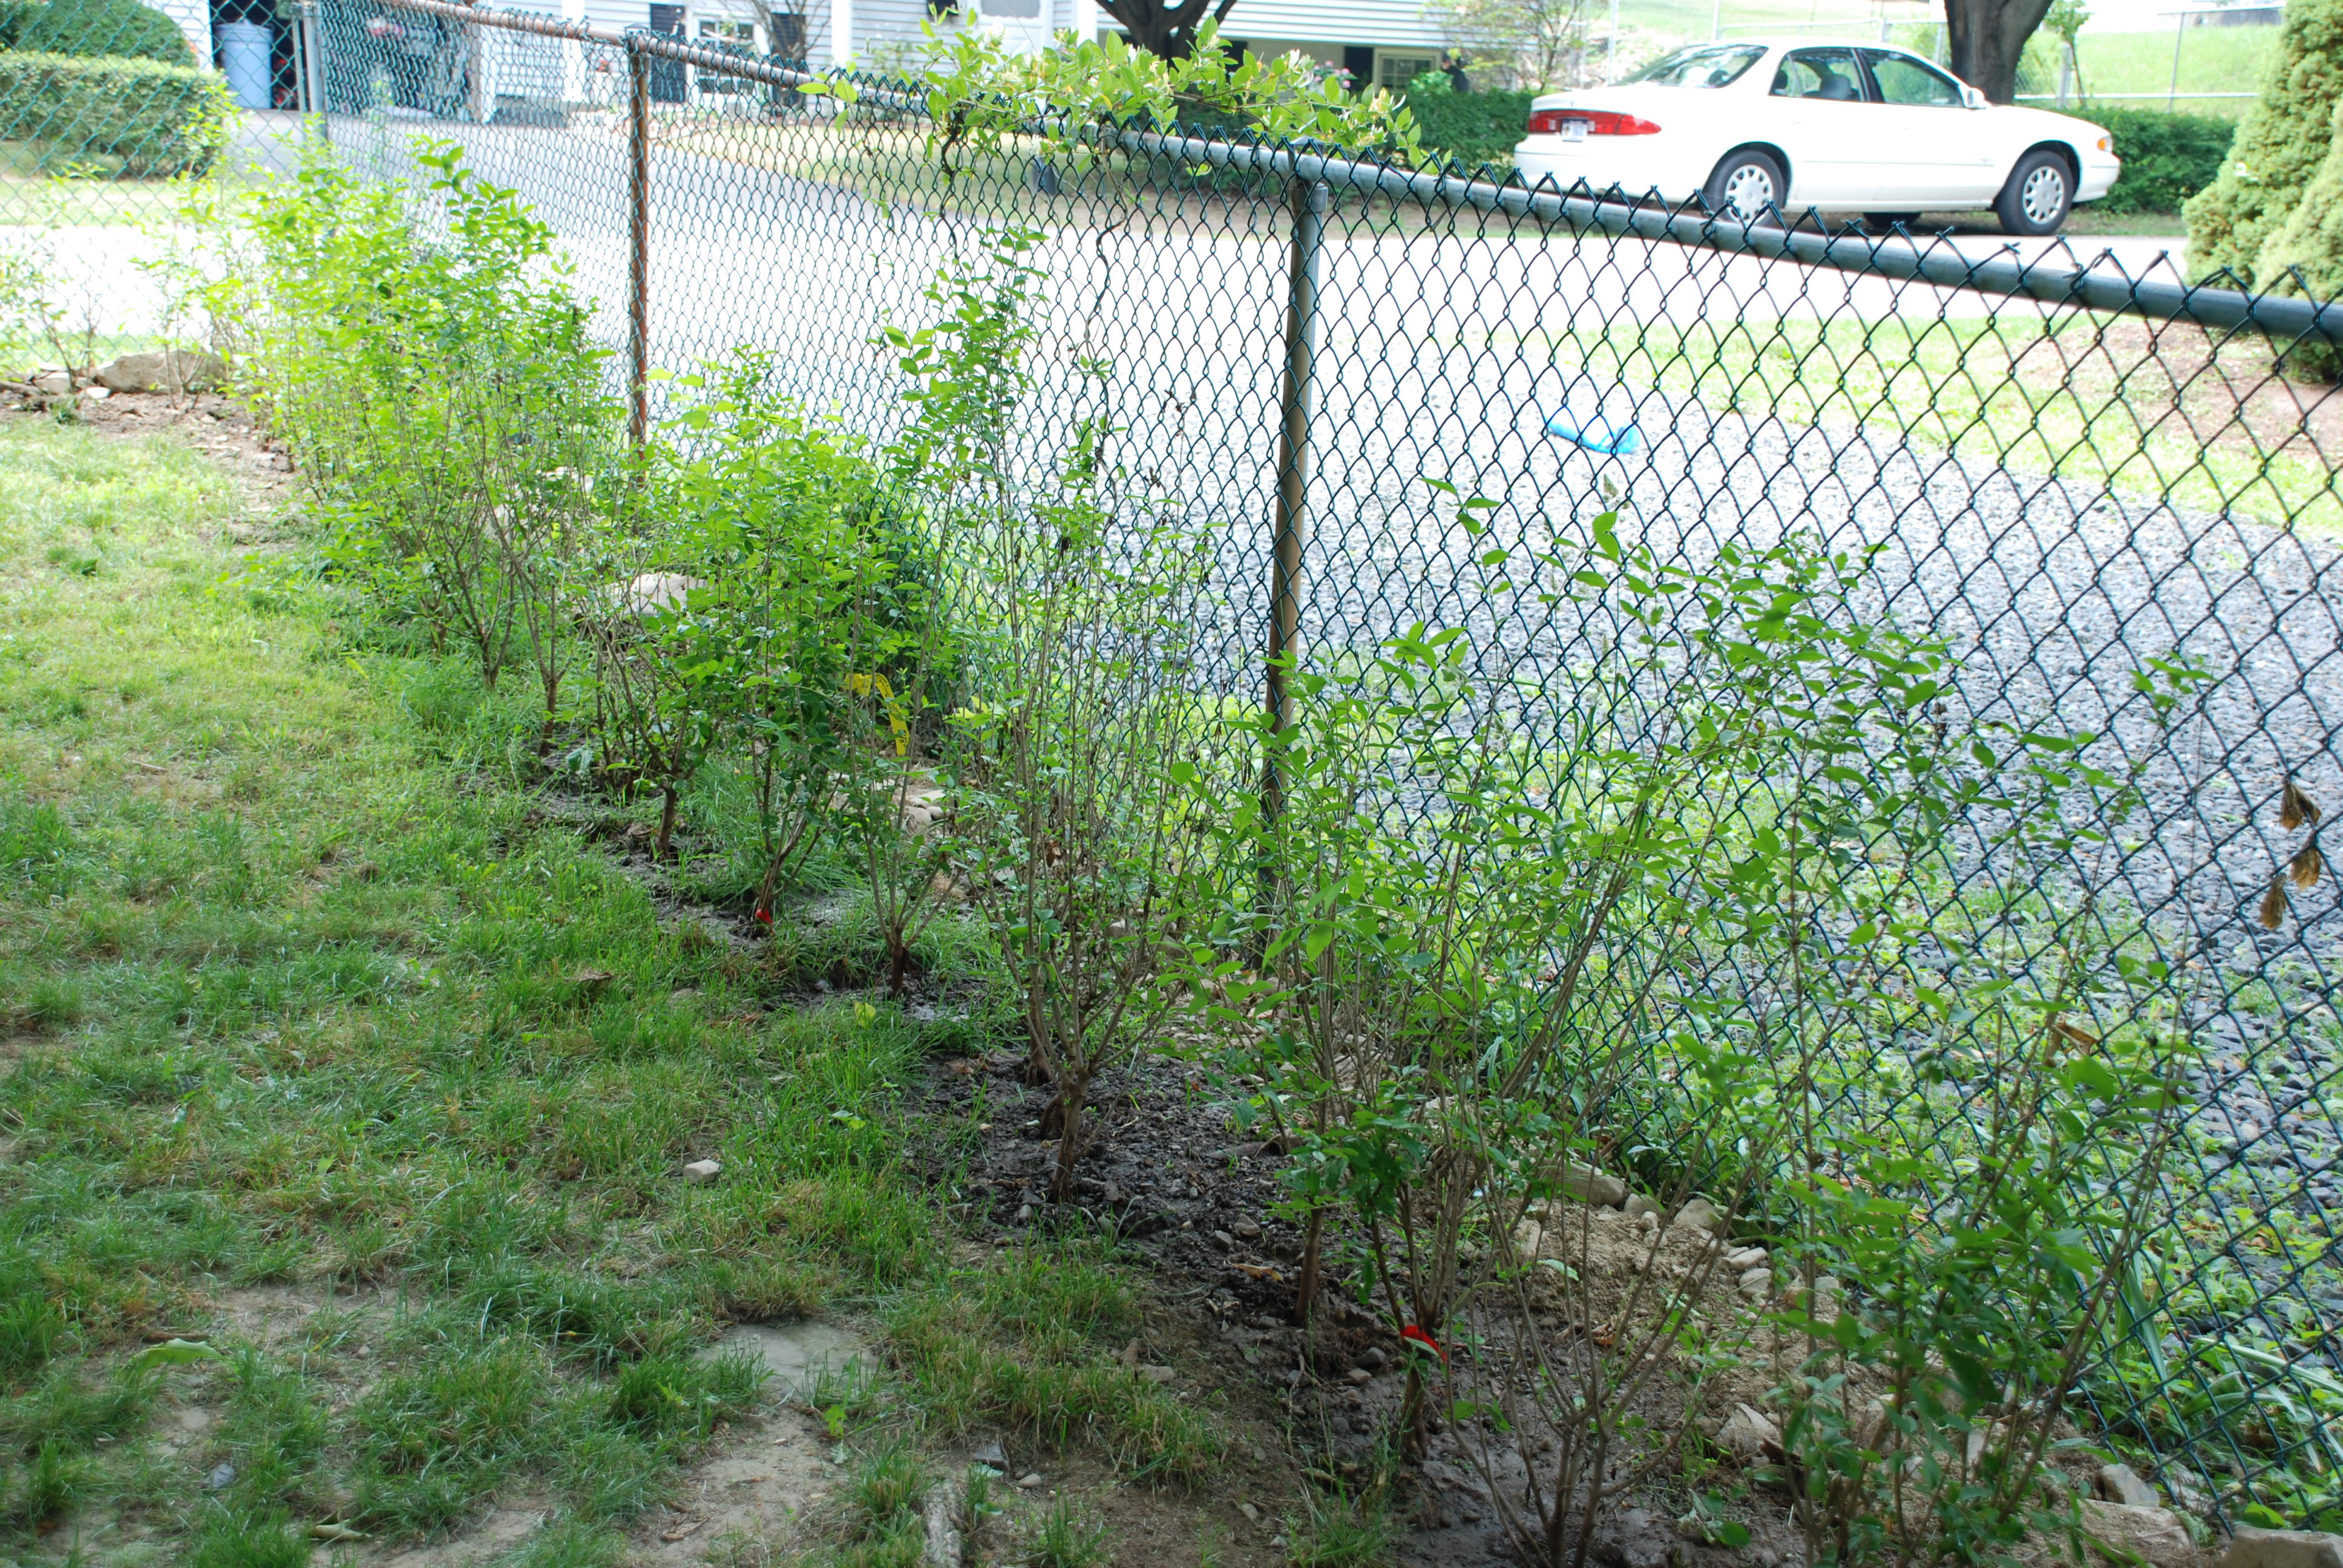 How to Plant Privet Hedge? 